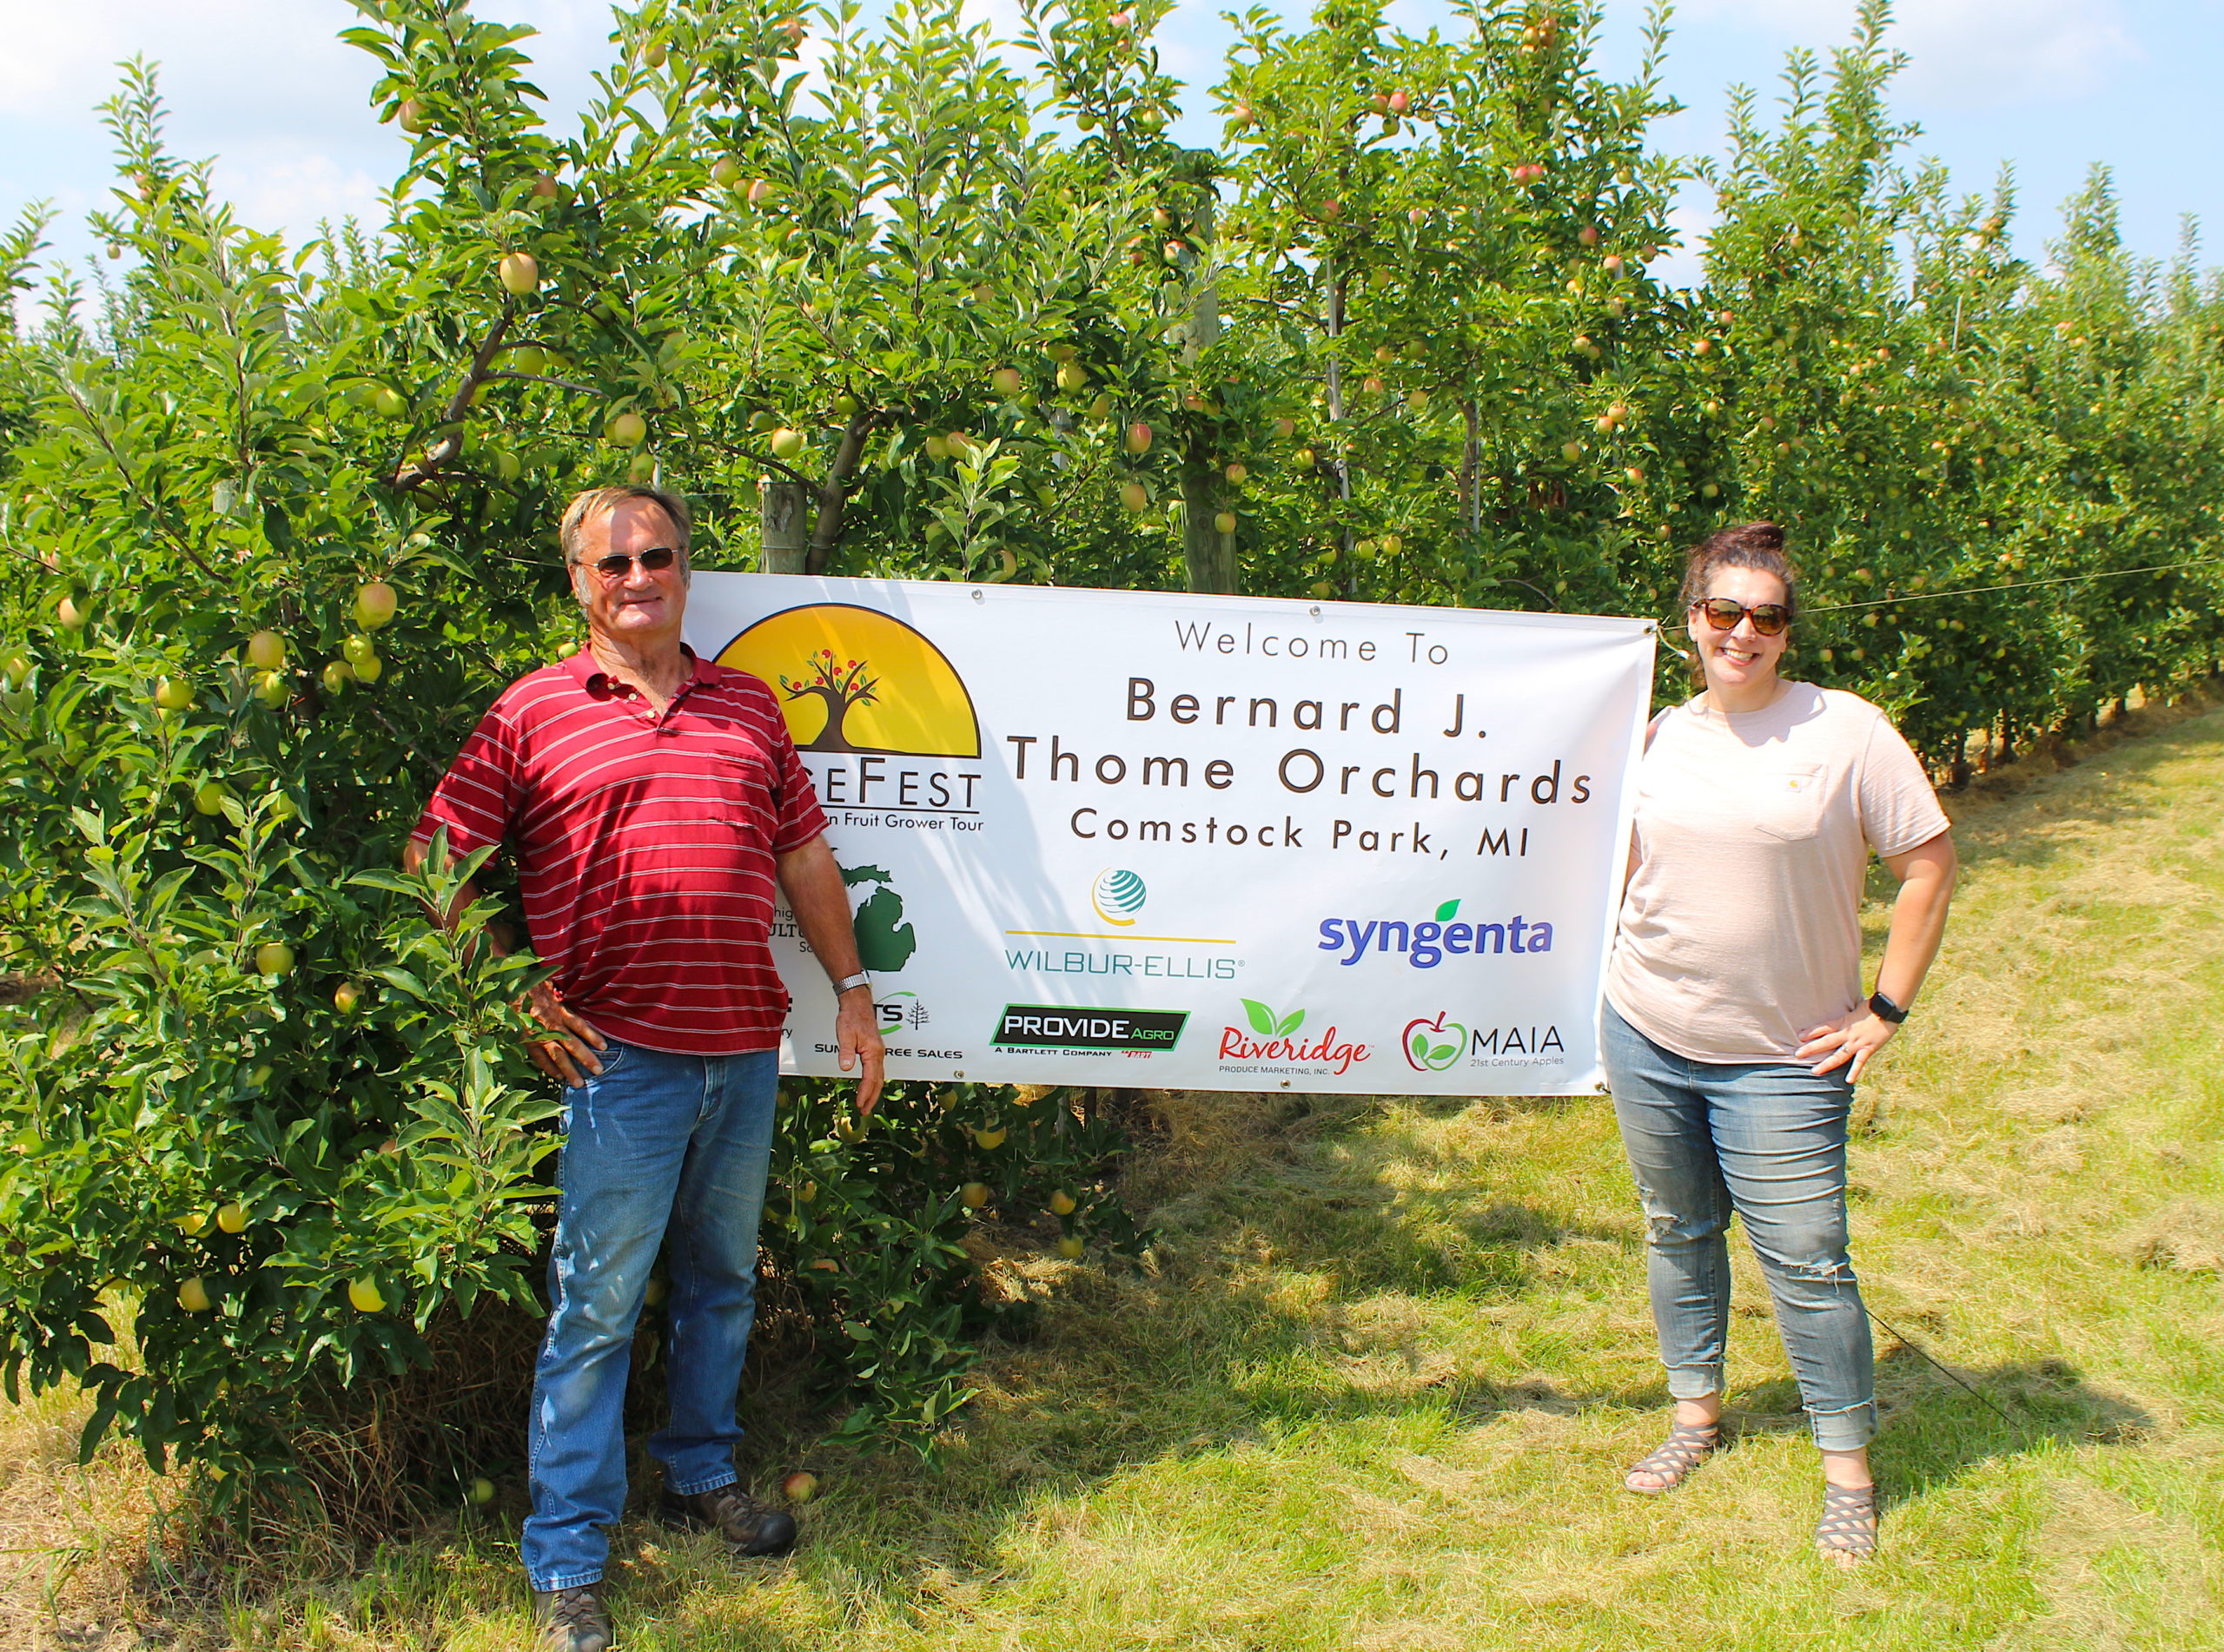 Bernard J. Thome and Kristen Thome hosted the next stop on the RidgeFest farm tour. 